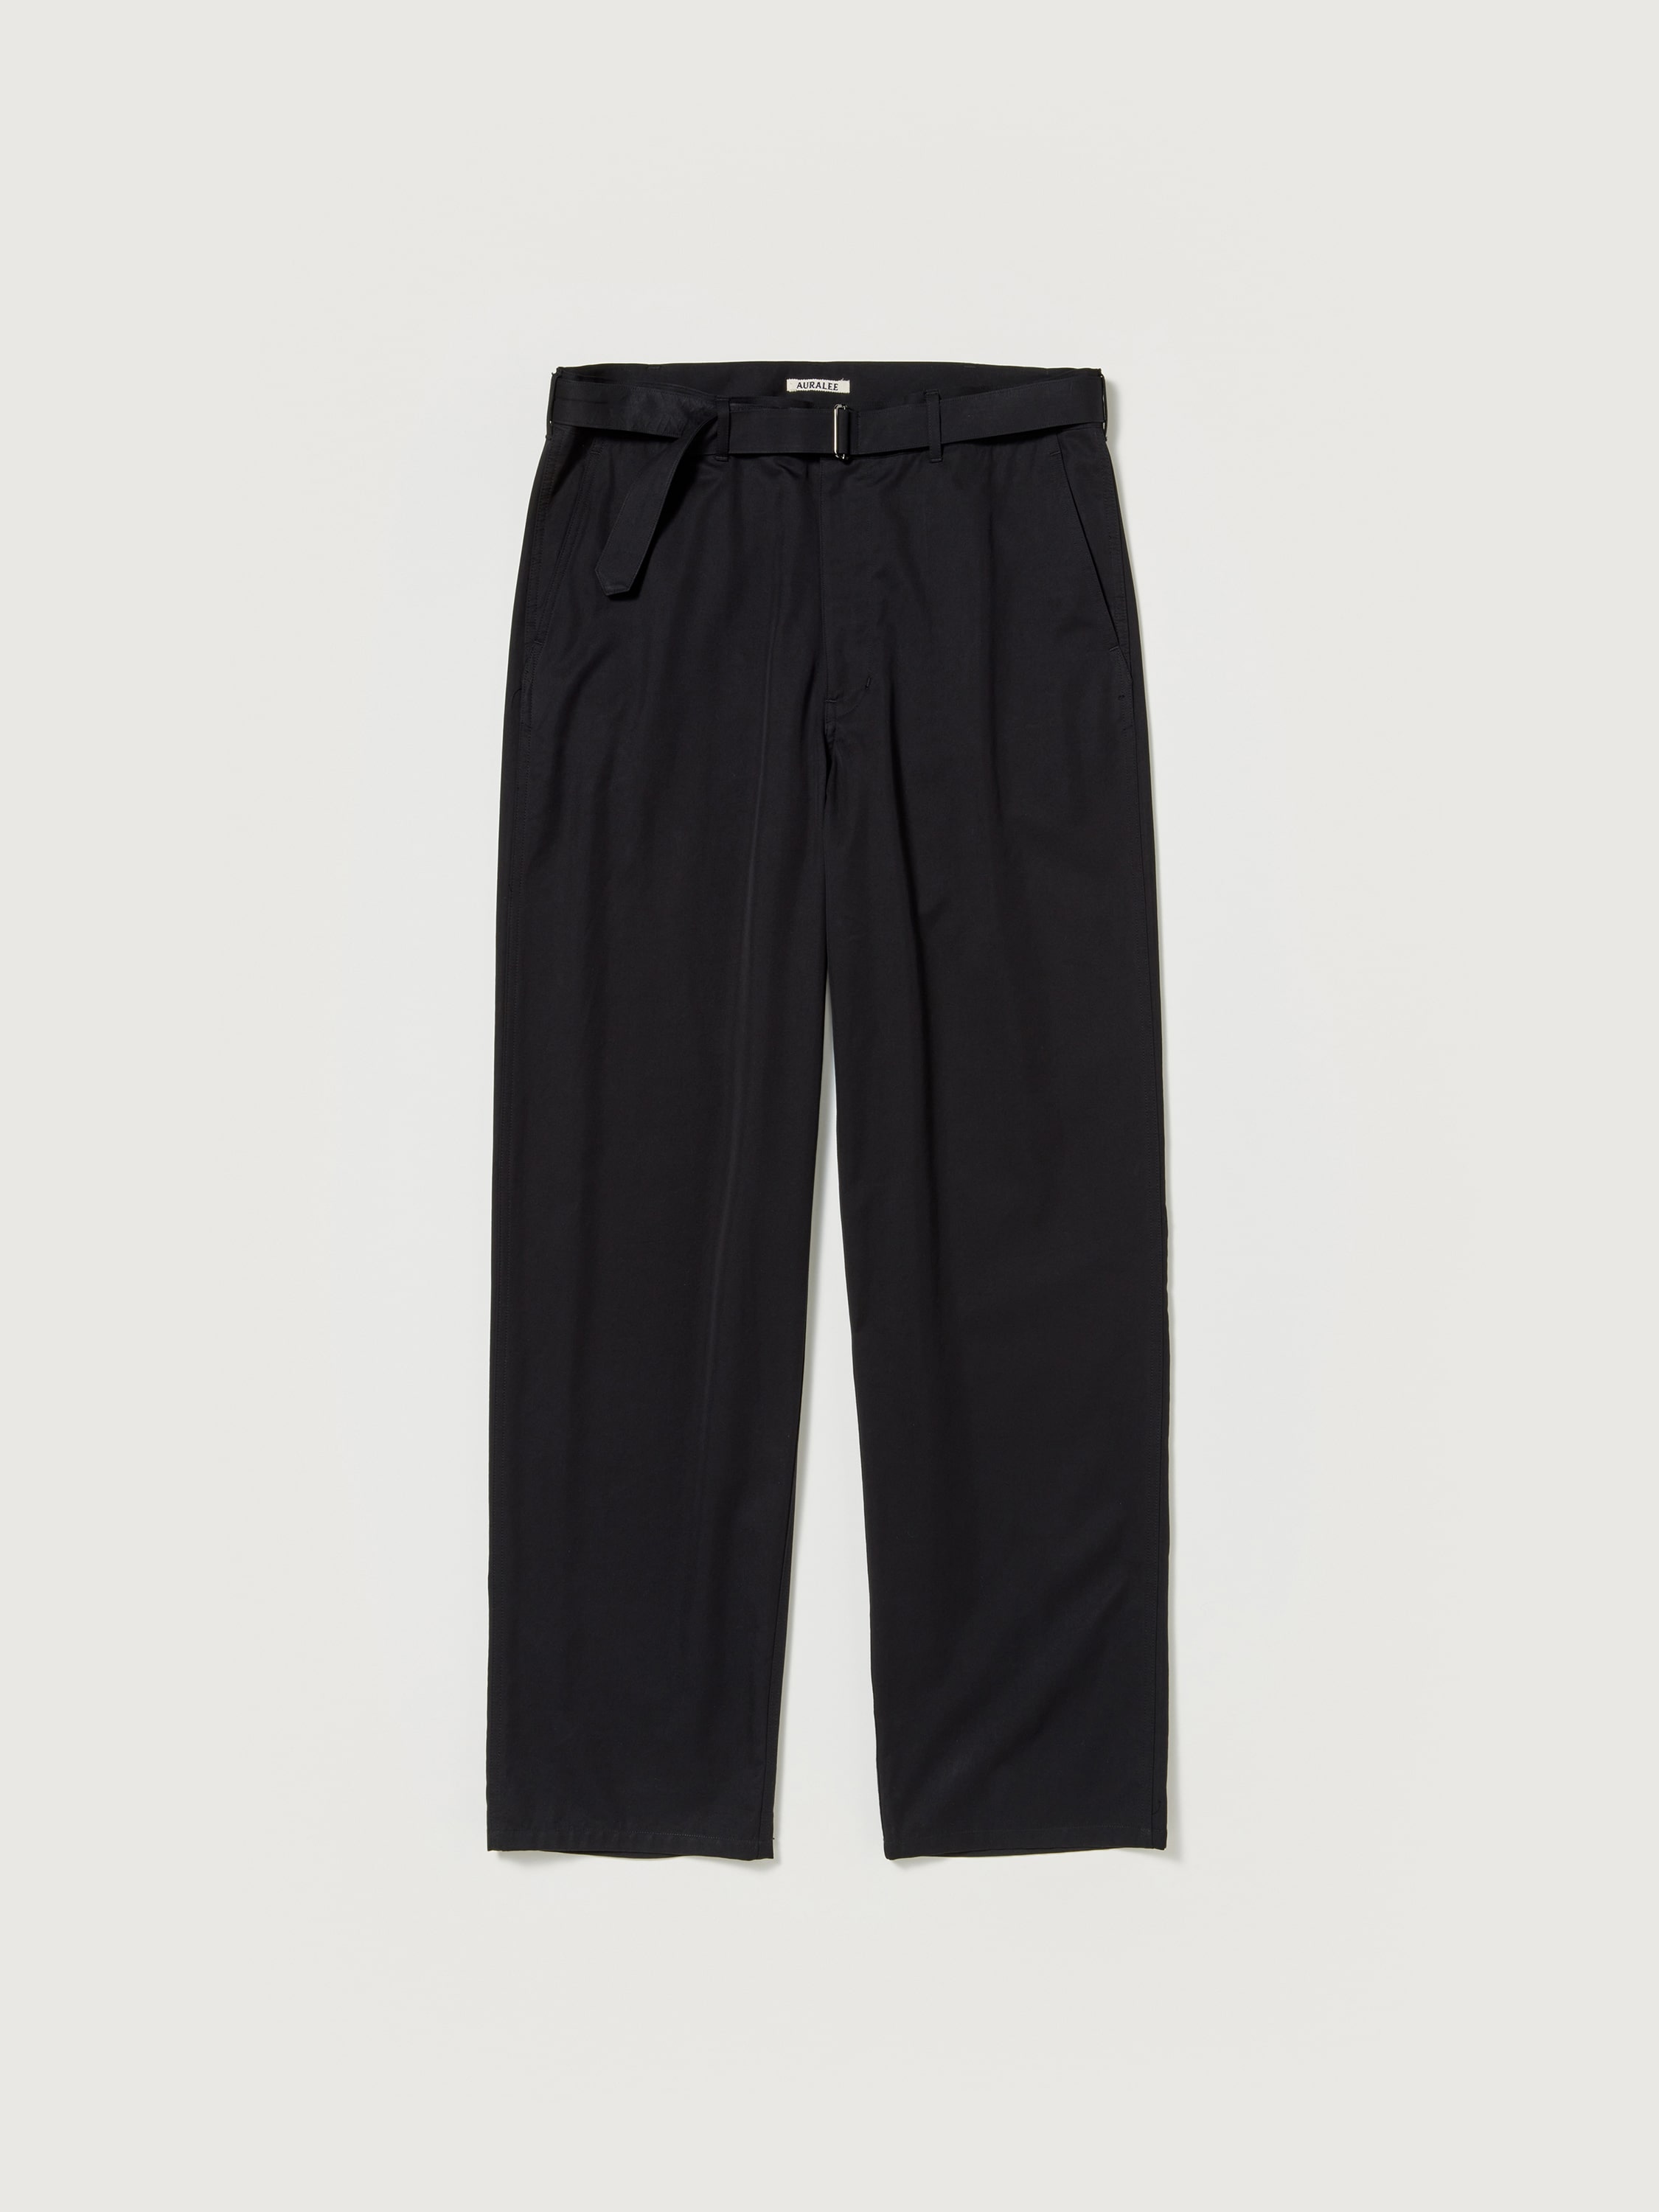 WASHED FINX SILK CHAMBRAY BELTED PANTS - AURALEE Official Website